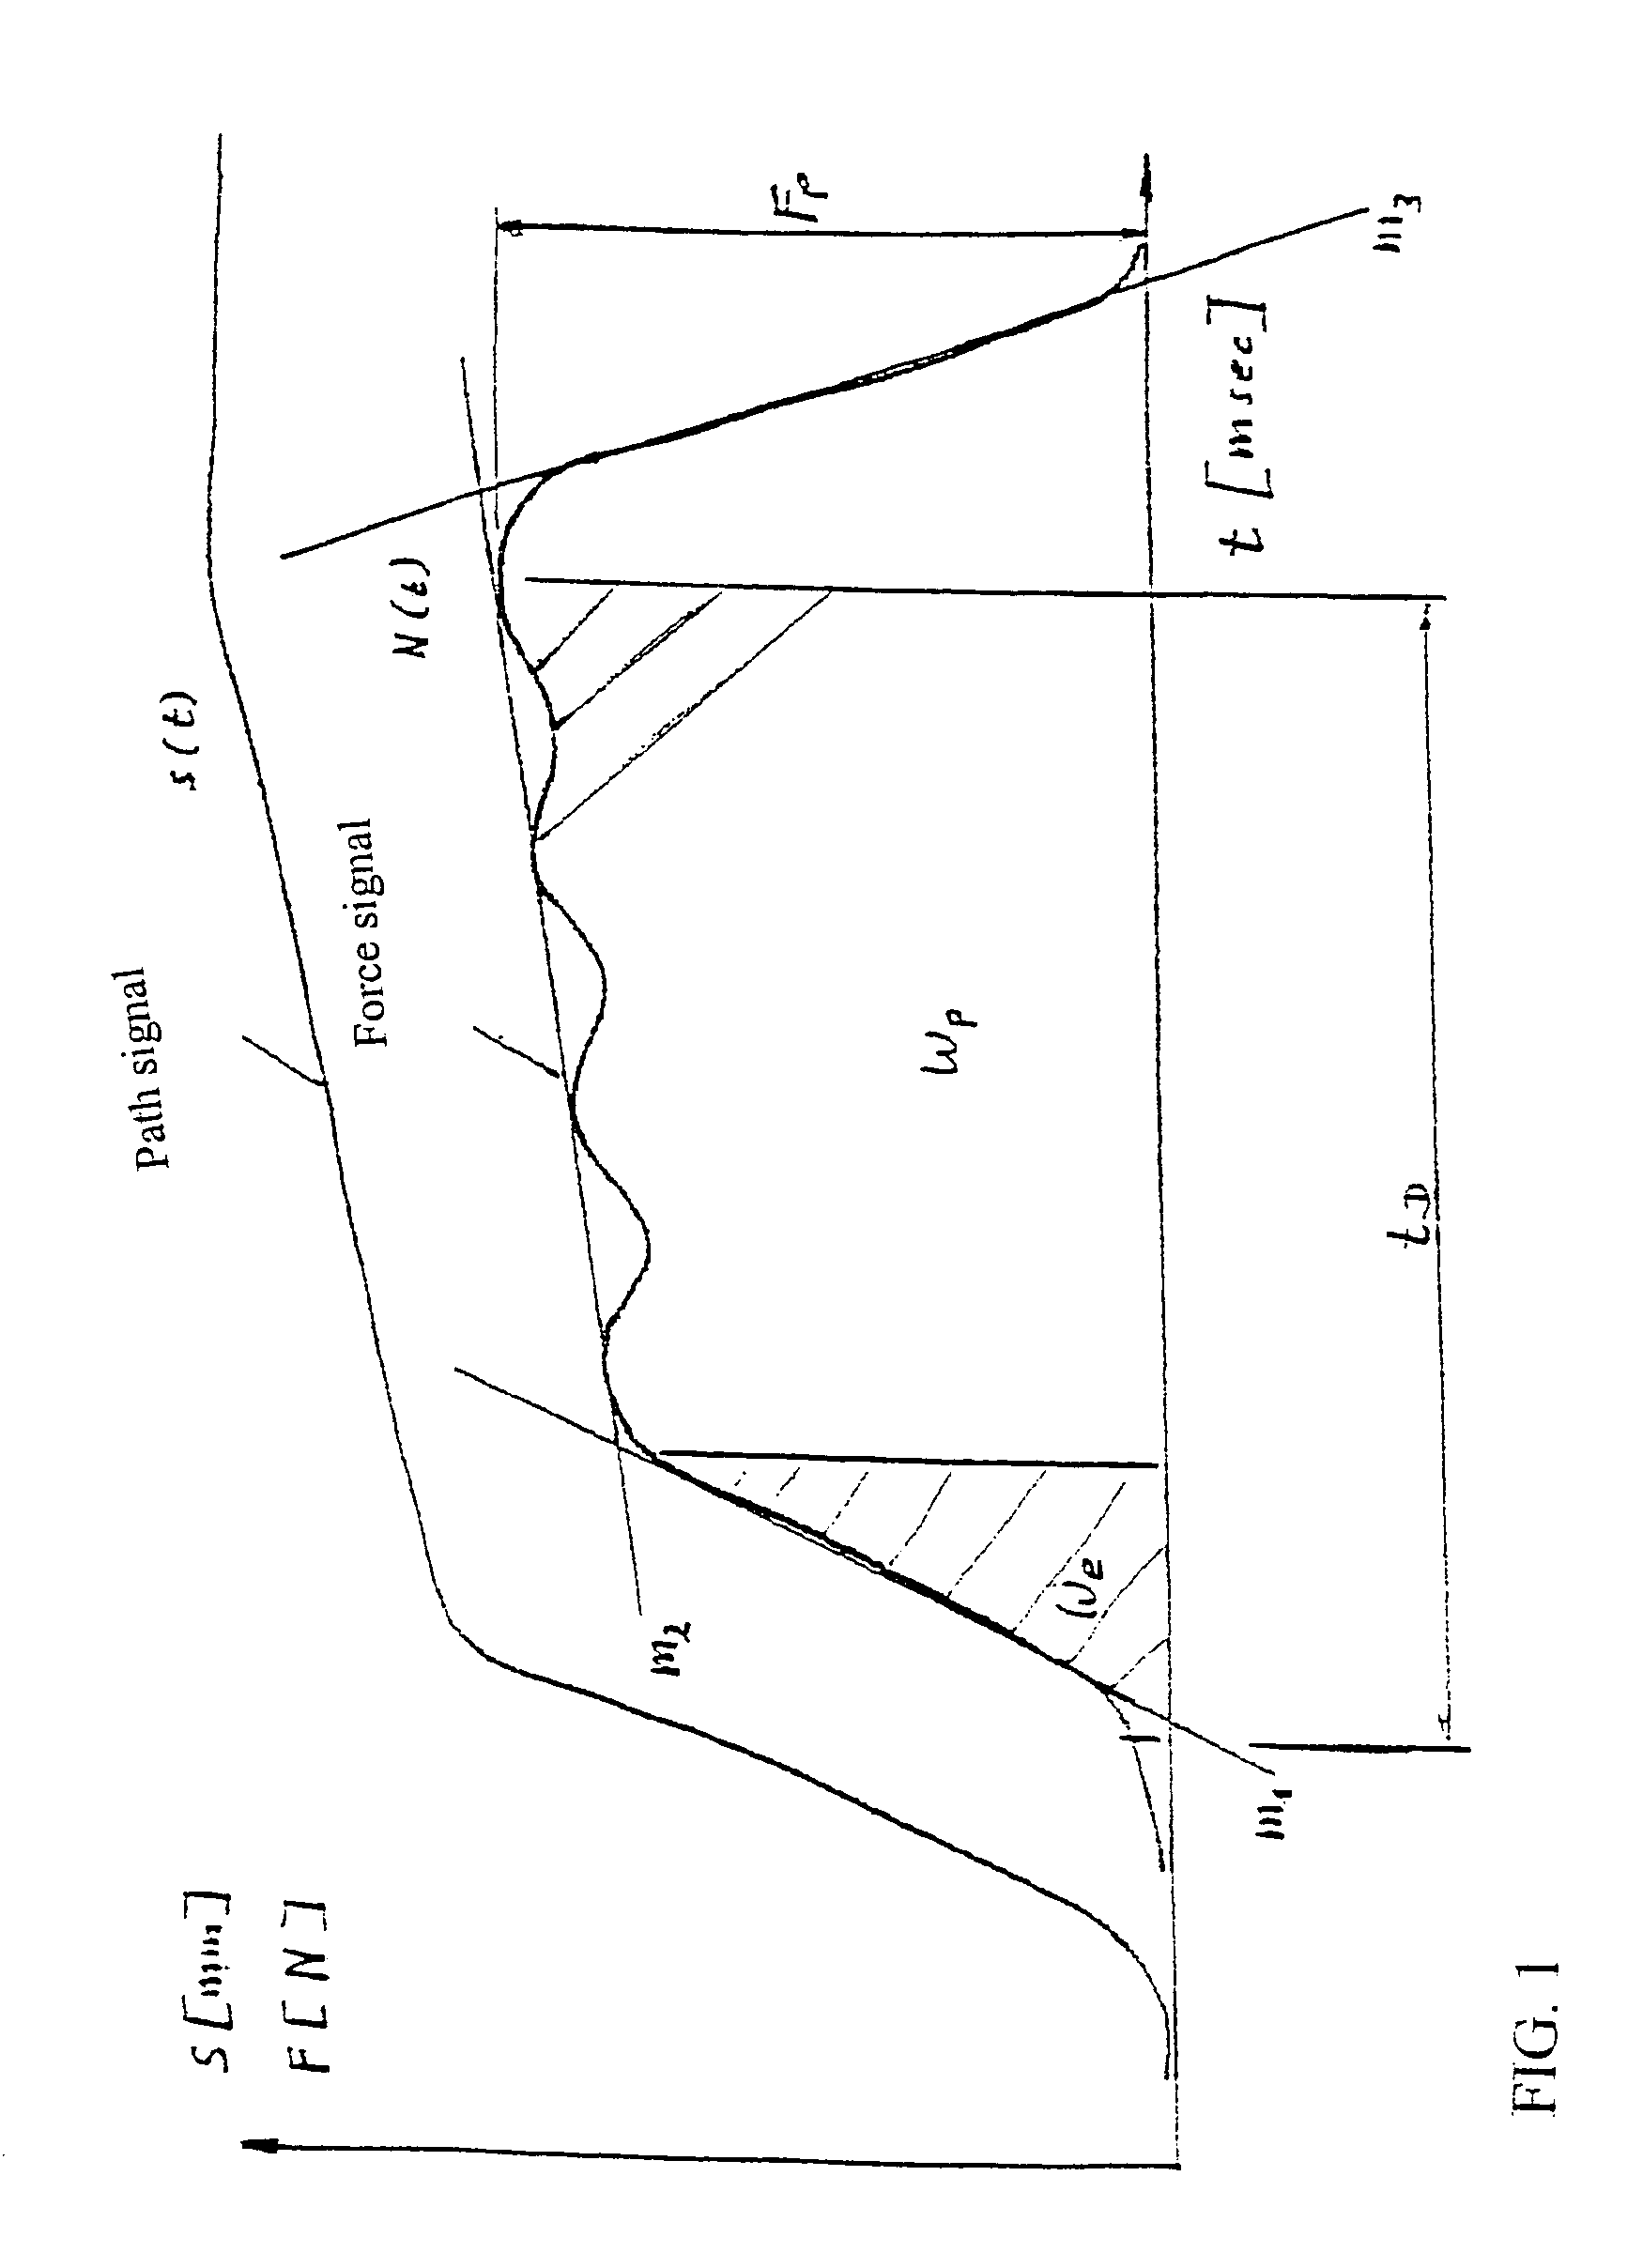 Method and device for measuring plasticity of materials such as ceramic raw materials and masses